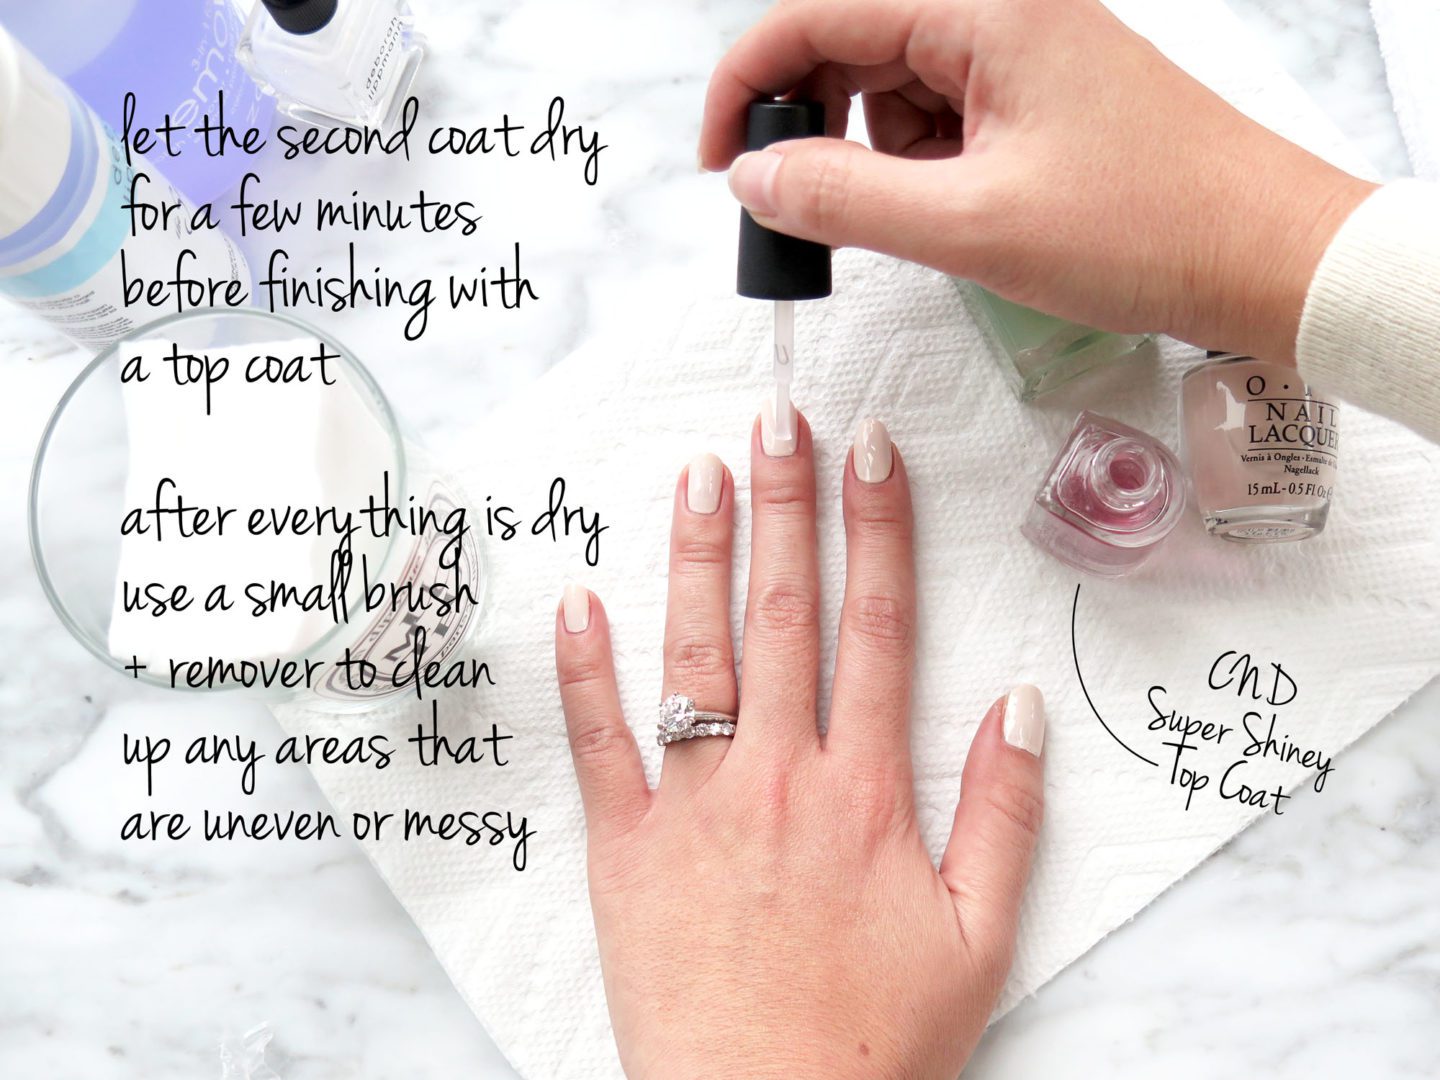 DIY At Home Manicure | The Beauty Look Book